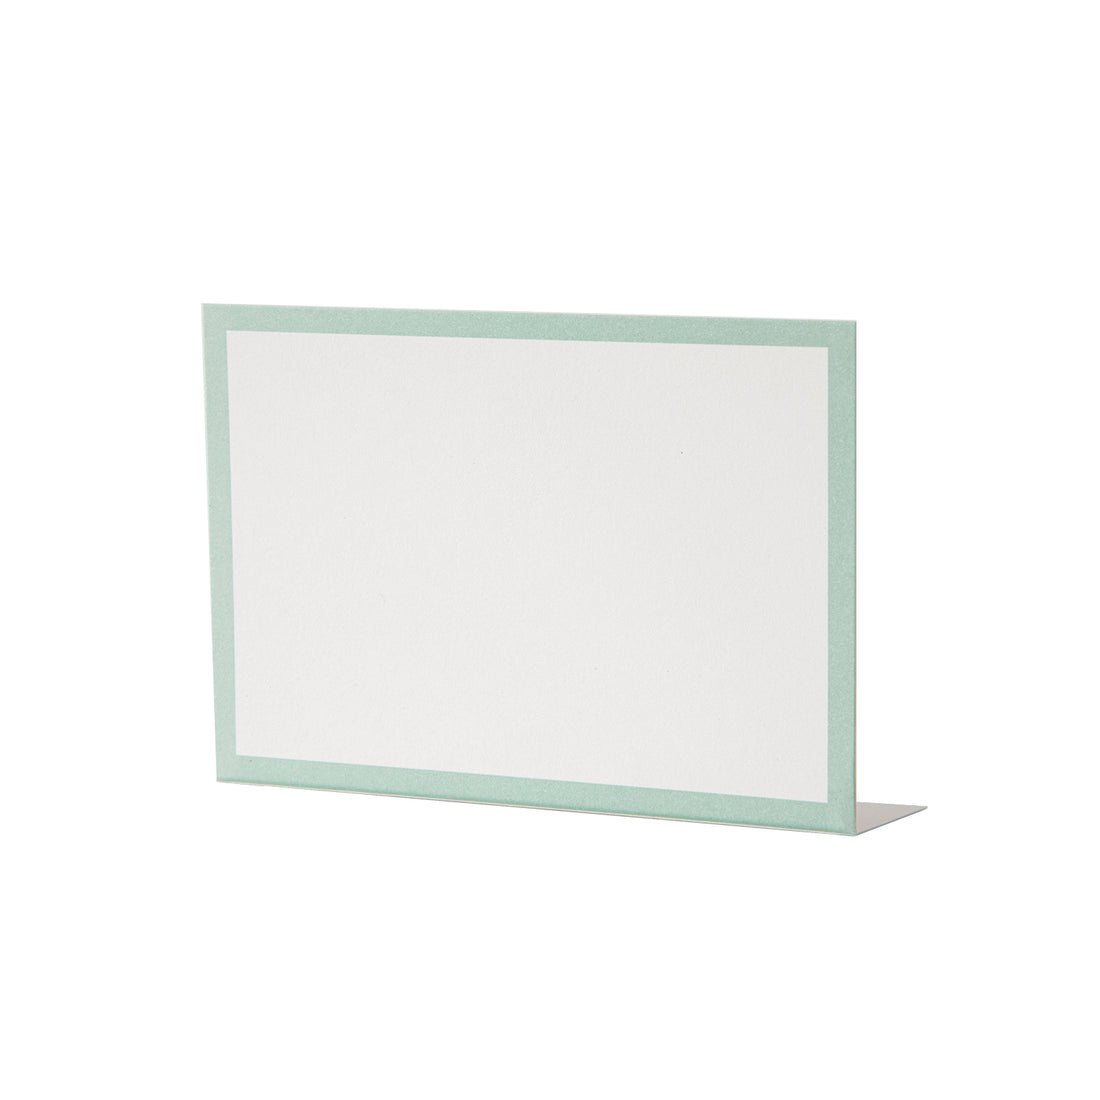 A Seafoam Frame Place Card by Hester &amp; Cook for place cards on a white background.